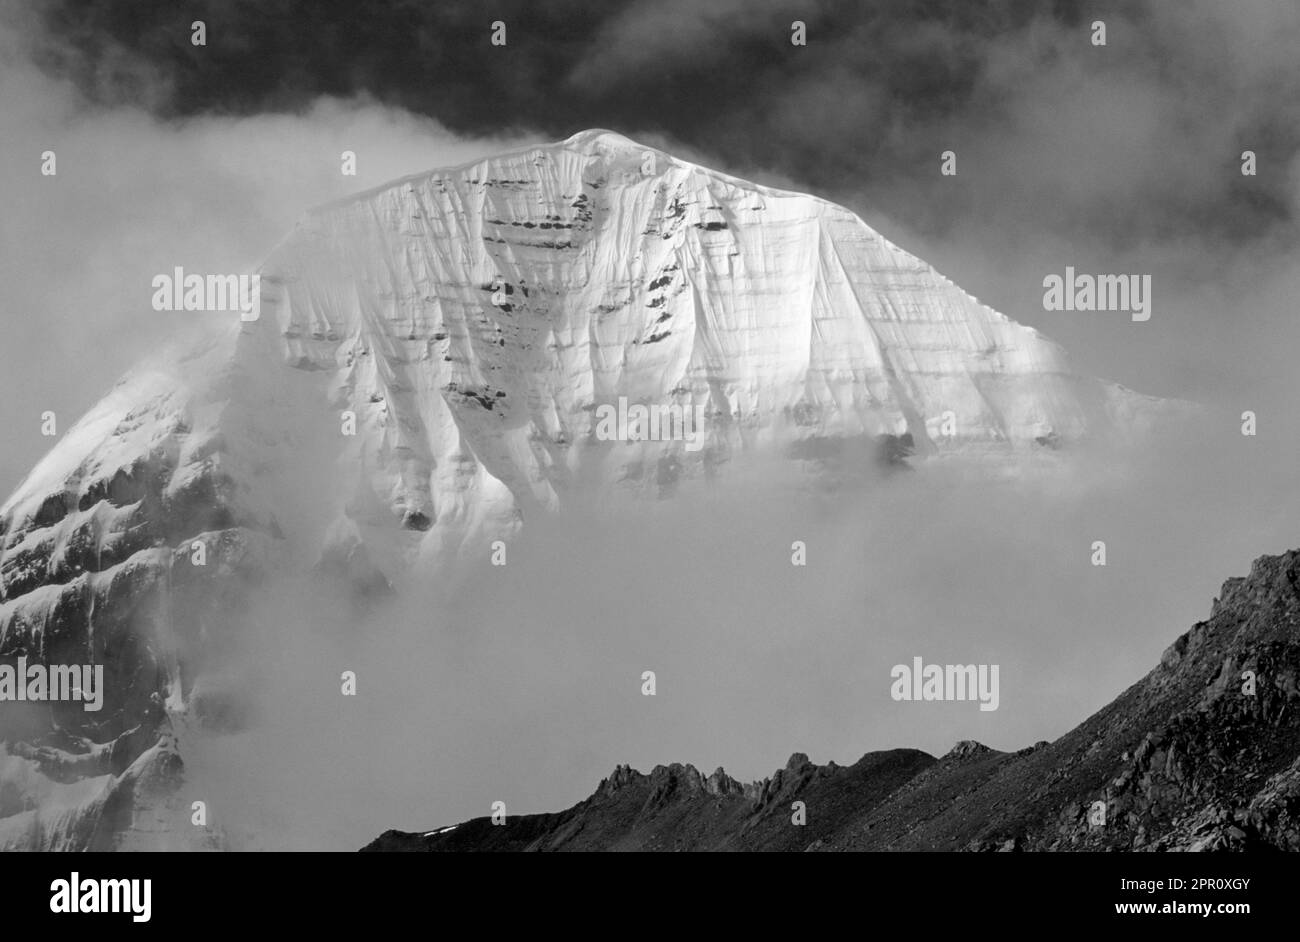 The mist enshrouded North Face of MOUNT KAILASH (6638 M) is a sacred site for BUDDHIST & HINDU  PILGRIMS - TIBET Stock Photo